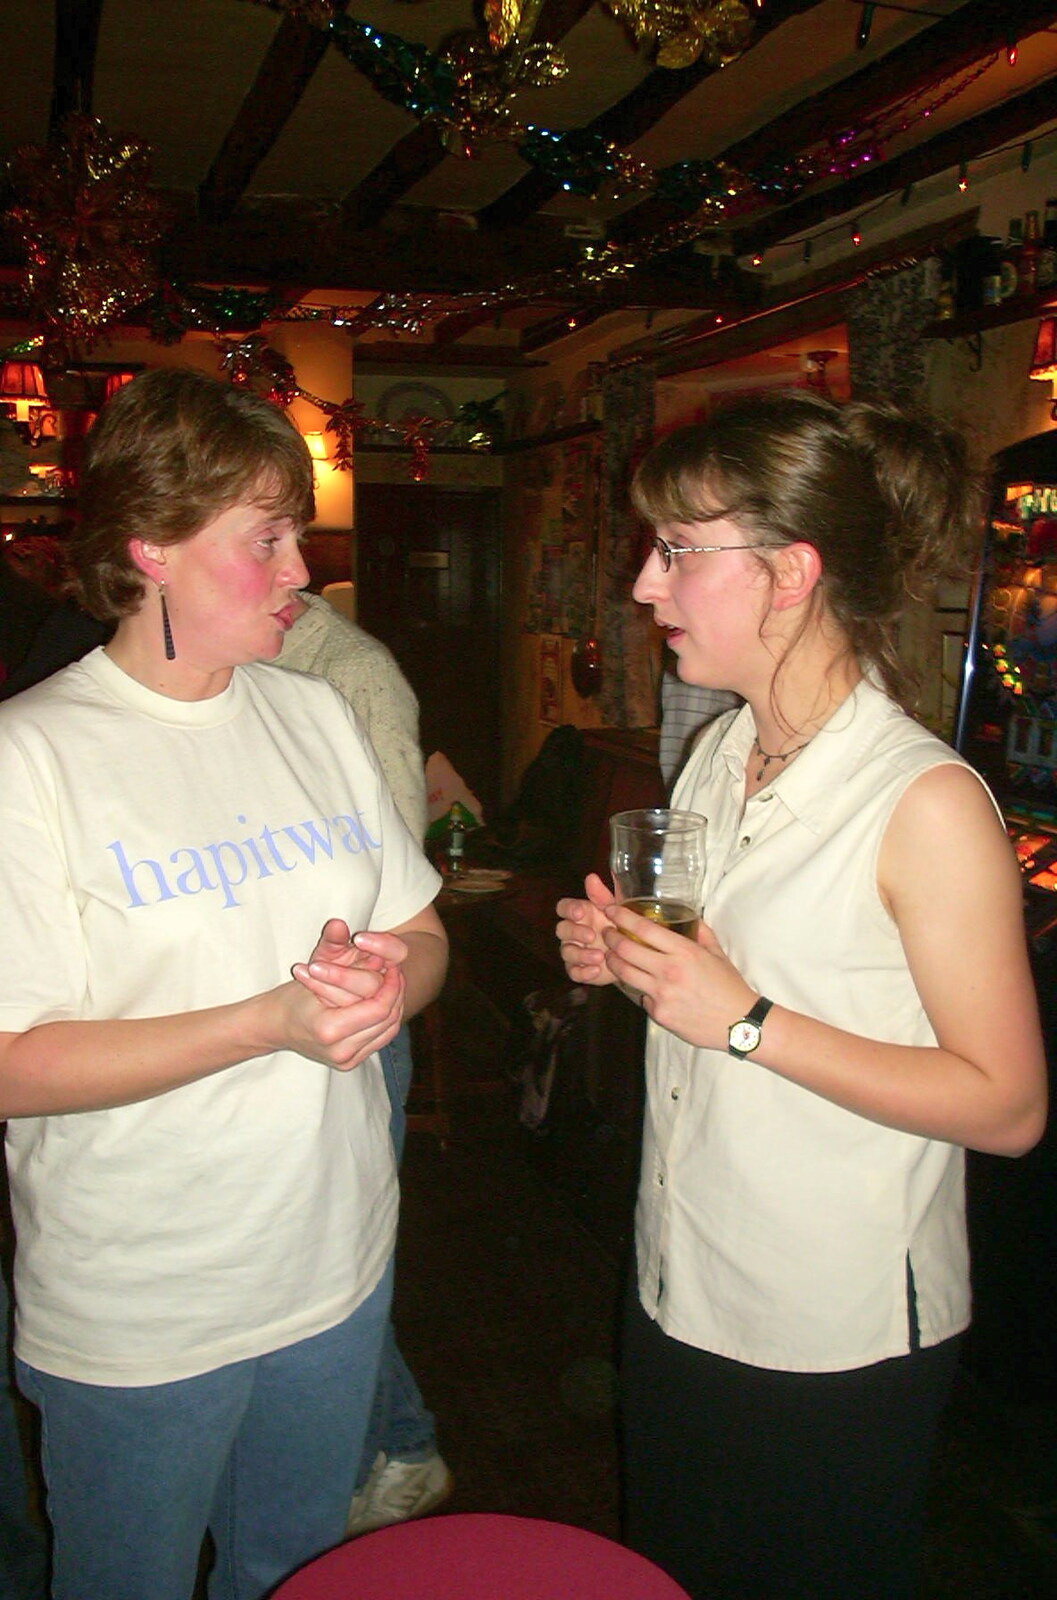 New Year's Eve at the Swan Inn, Brome, Suffolk - 31st December 2002: Pippa talks to a surprised Suey